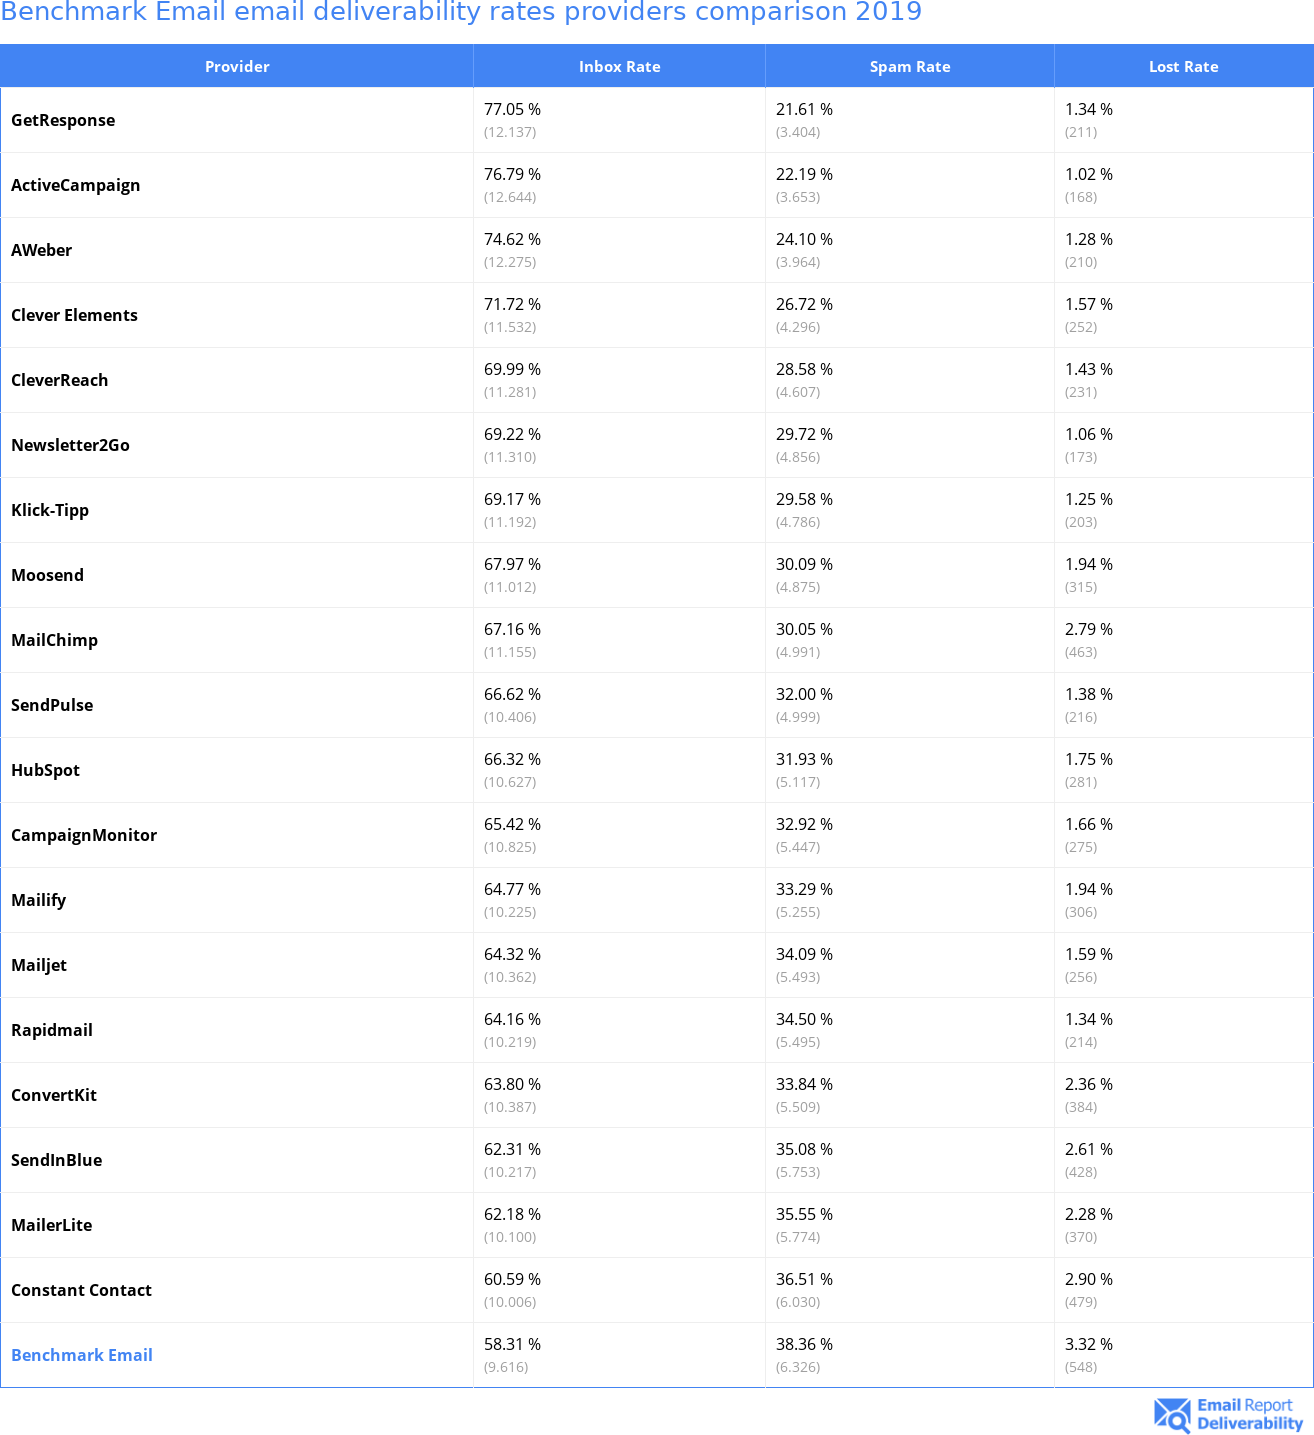 Benchmark Email email deliverability rates providers comparison 2019